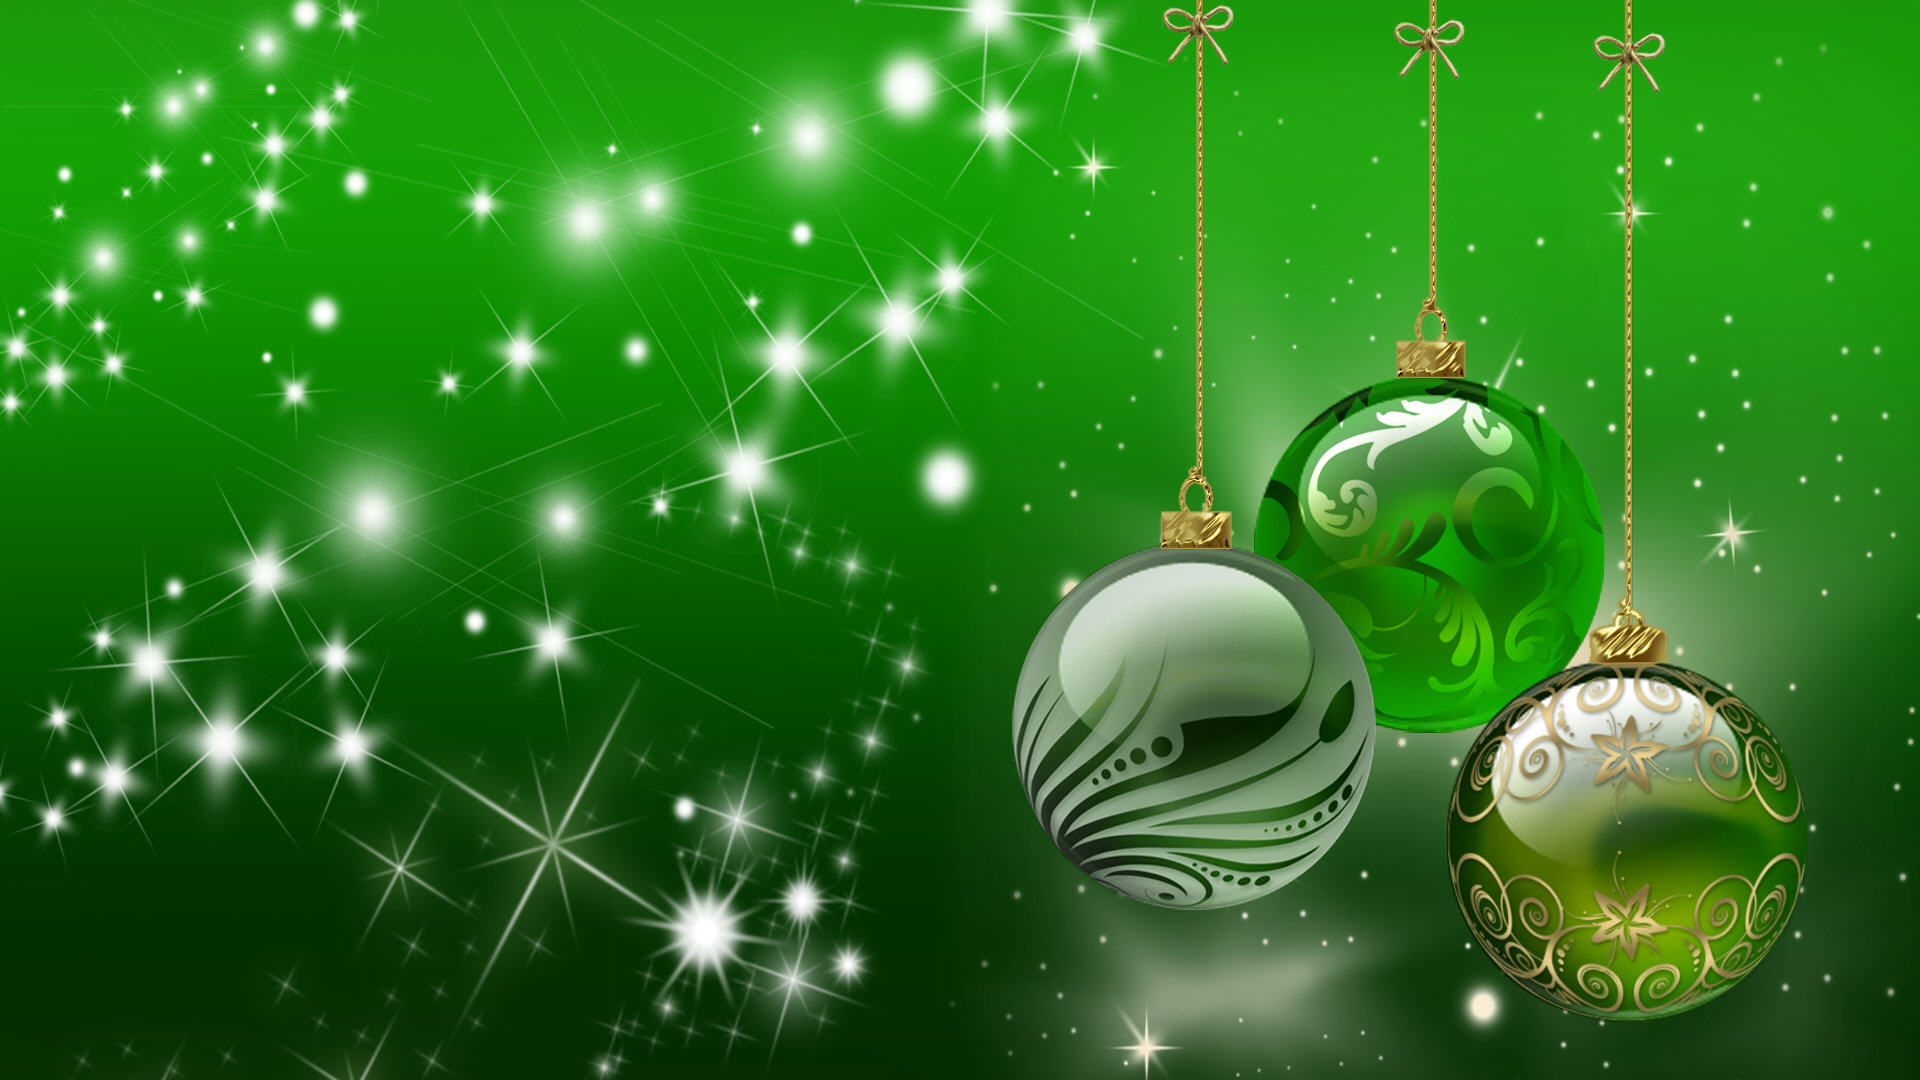 Green Holiday Backgrounds